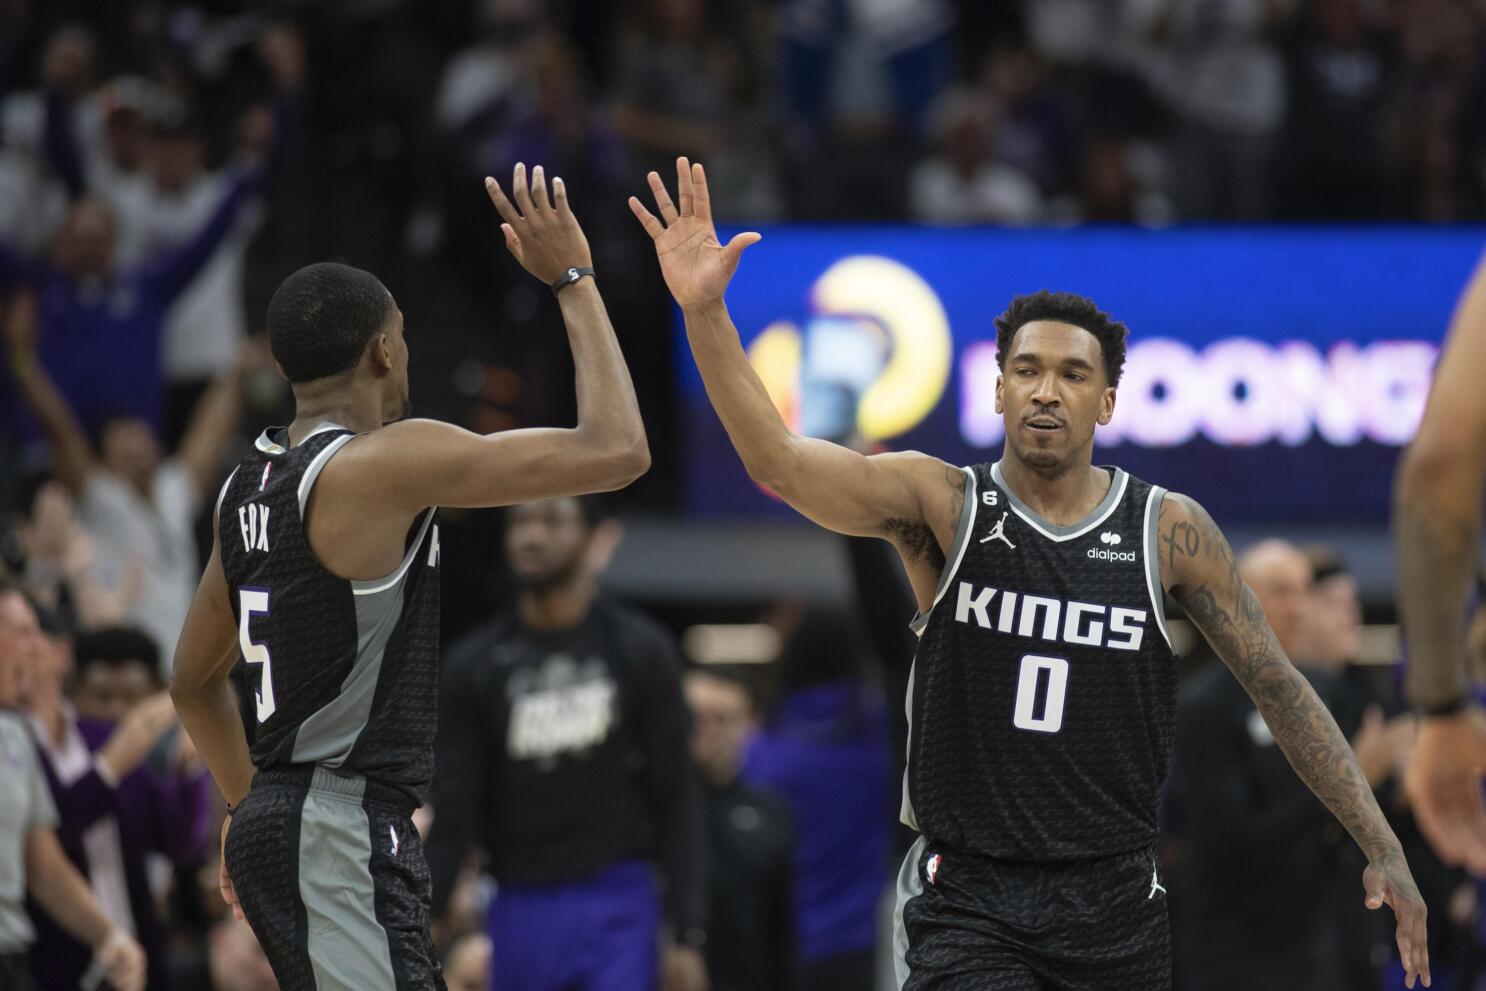 Kings news: Davion Mitchell shares advice given to him by Chris Paul